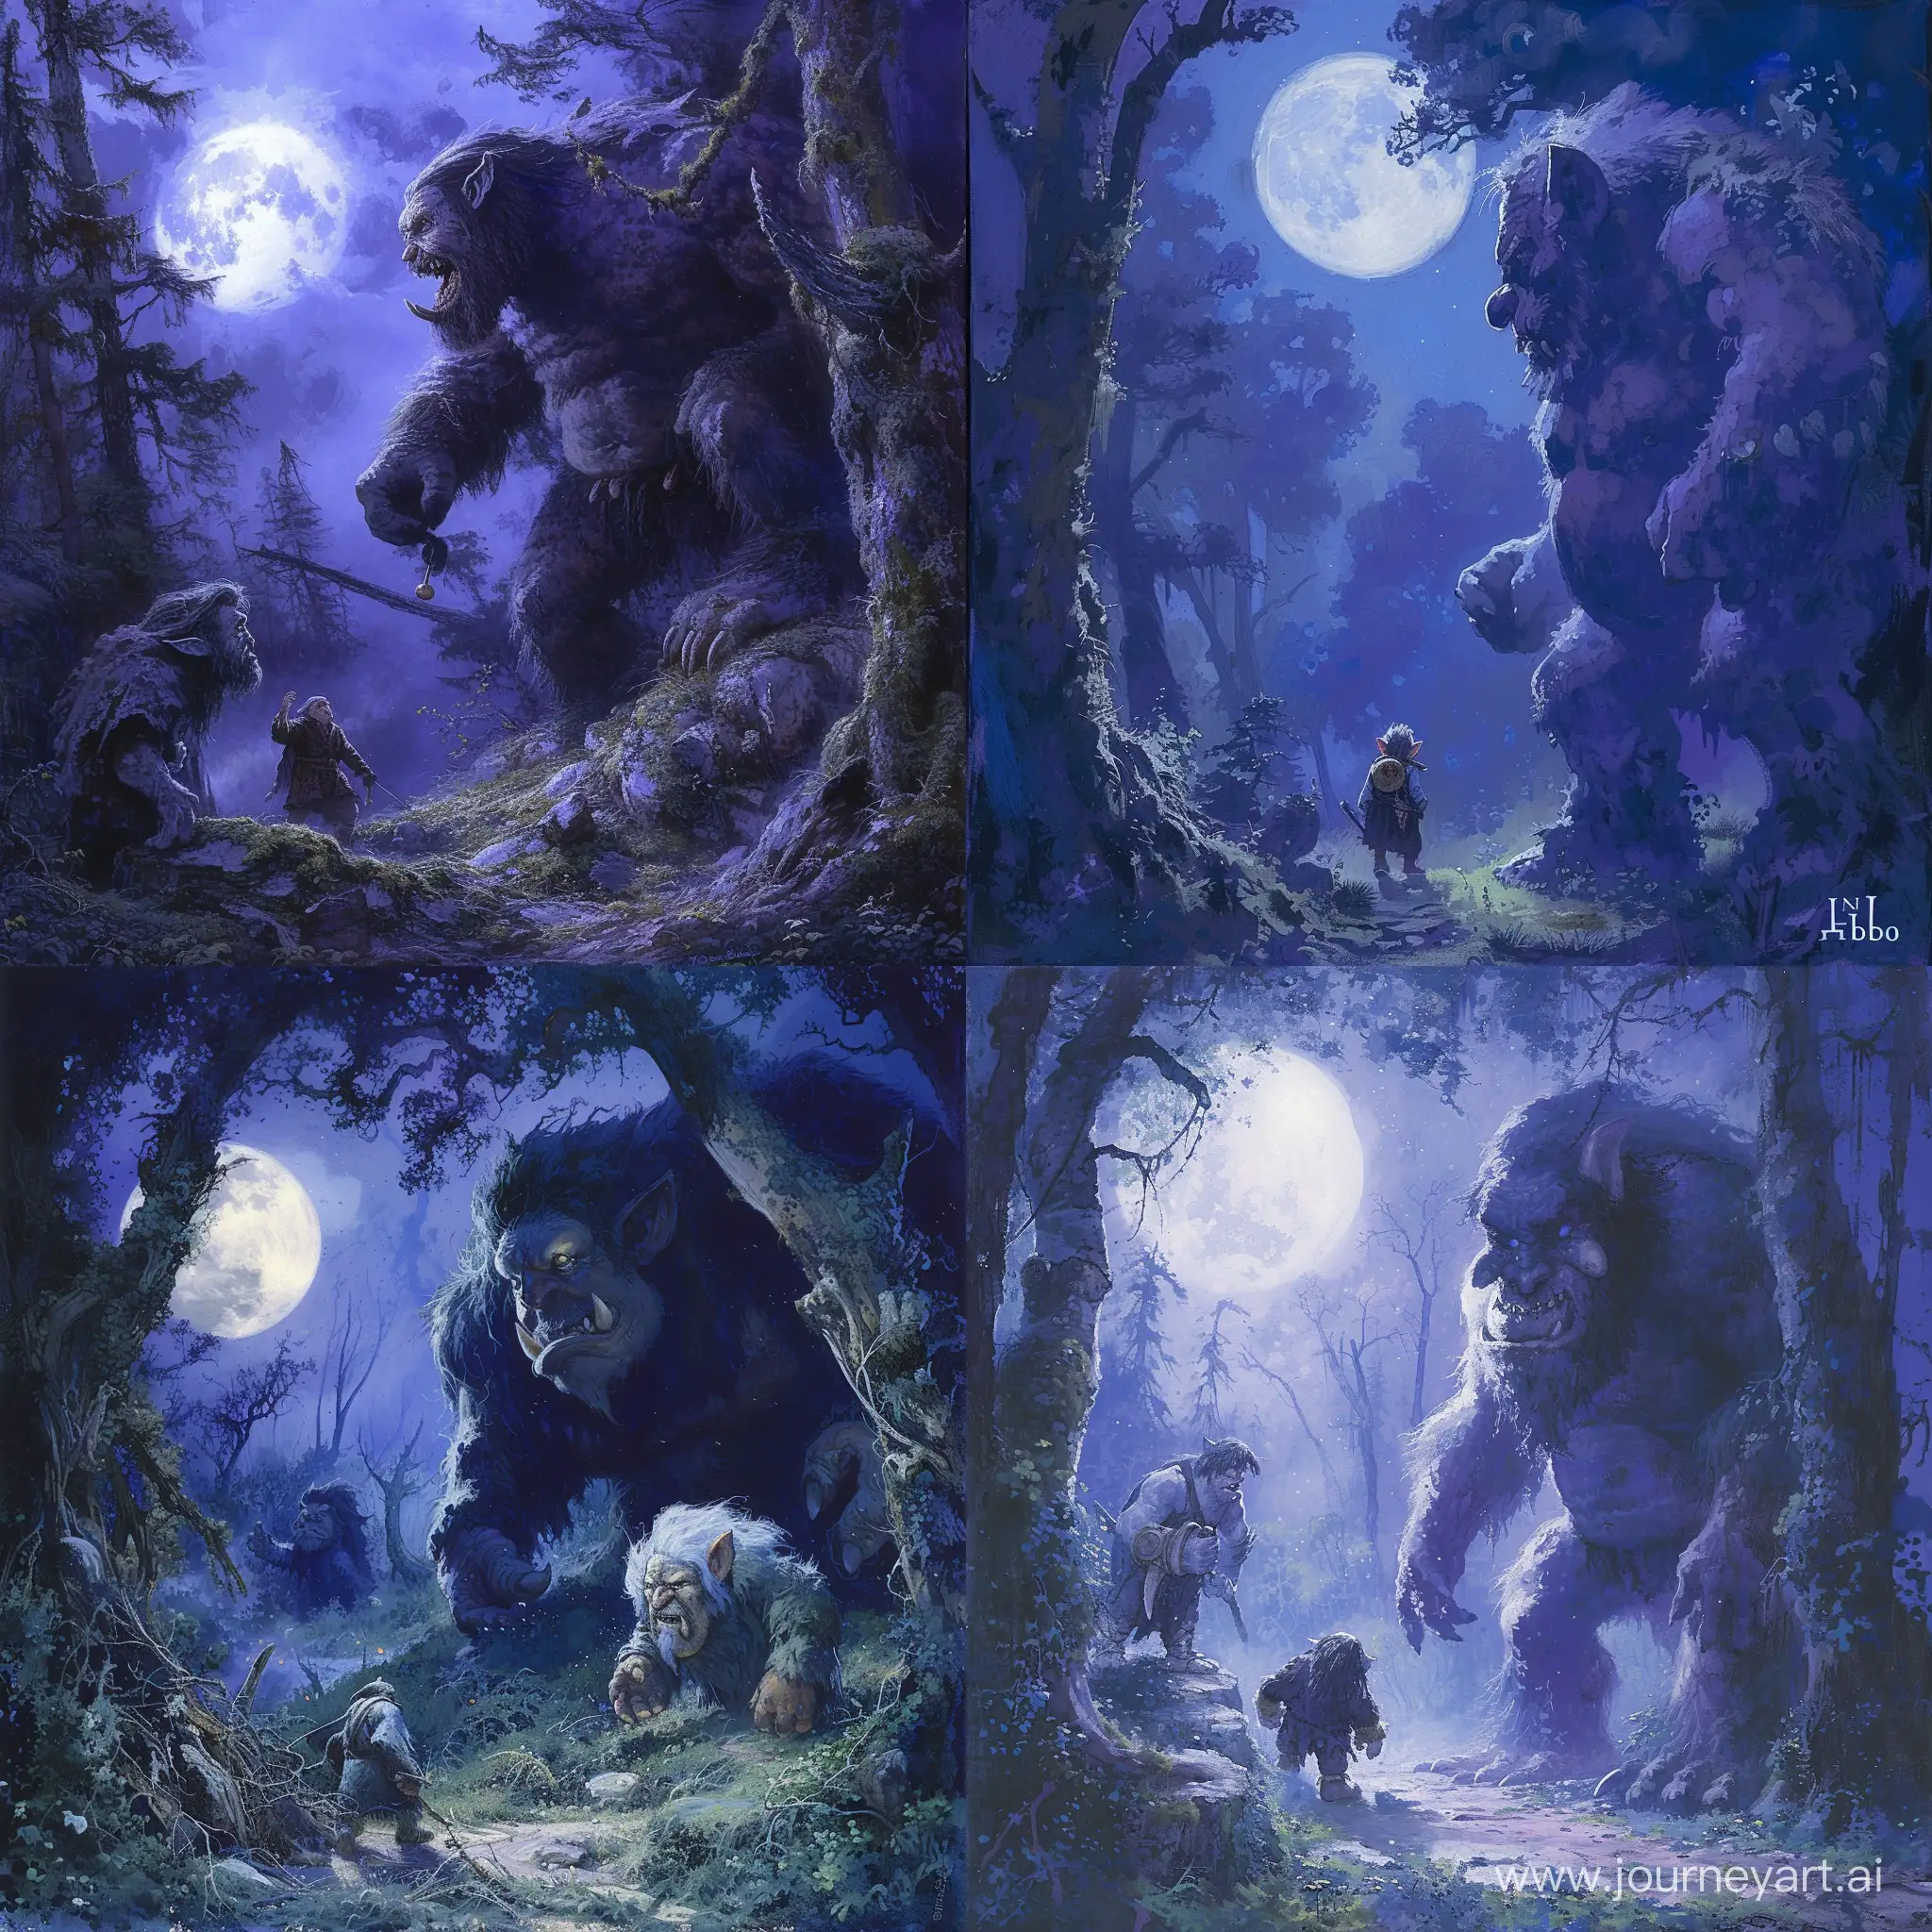 Encounter with Trolls, . A moonlit, forested scene with oversized, brutish trolls and a diminutive, stealthy Bilbo. The palette is duskyâpurples and bluesâcreating a nocturnal atmosphere. The composition blends danger and humor, with a tense yet playful mood.  IN the style of John Howe.